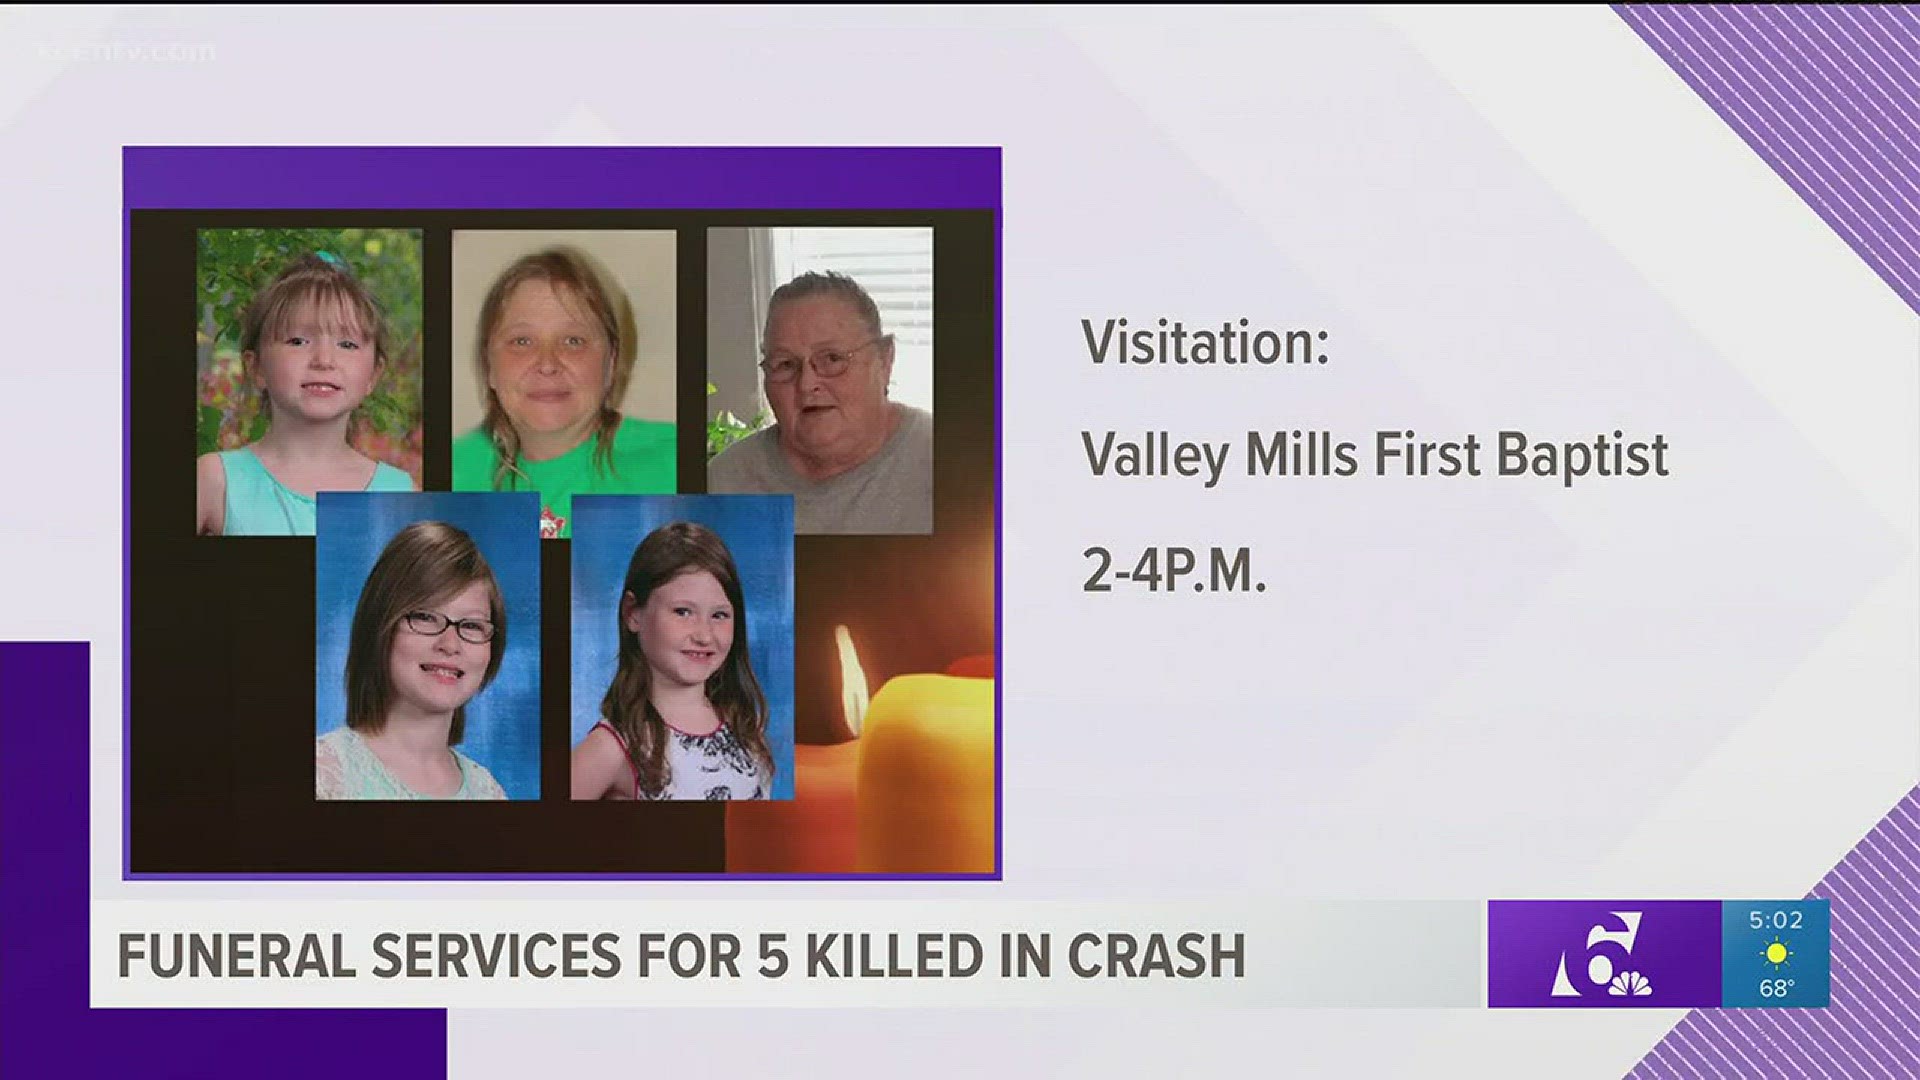 Funeral services have been set for three little girls and two women killed in a car crash.